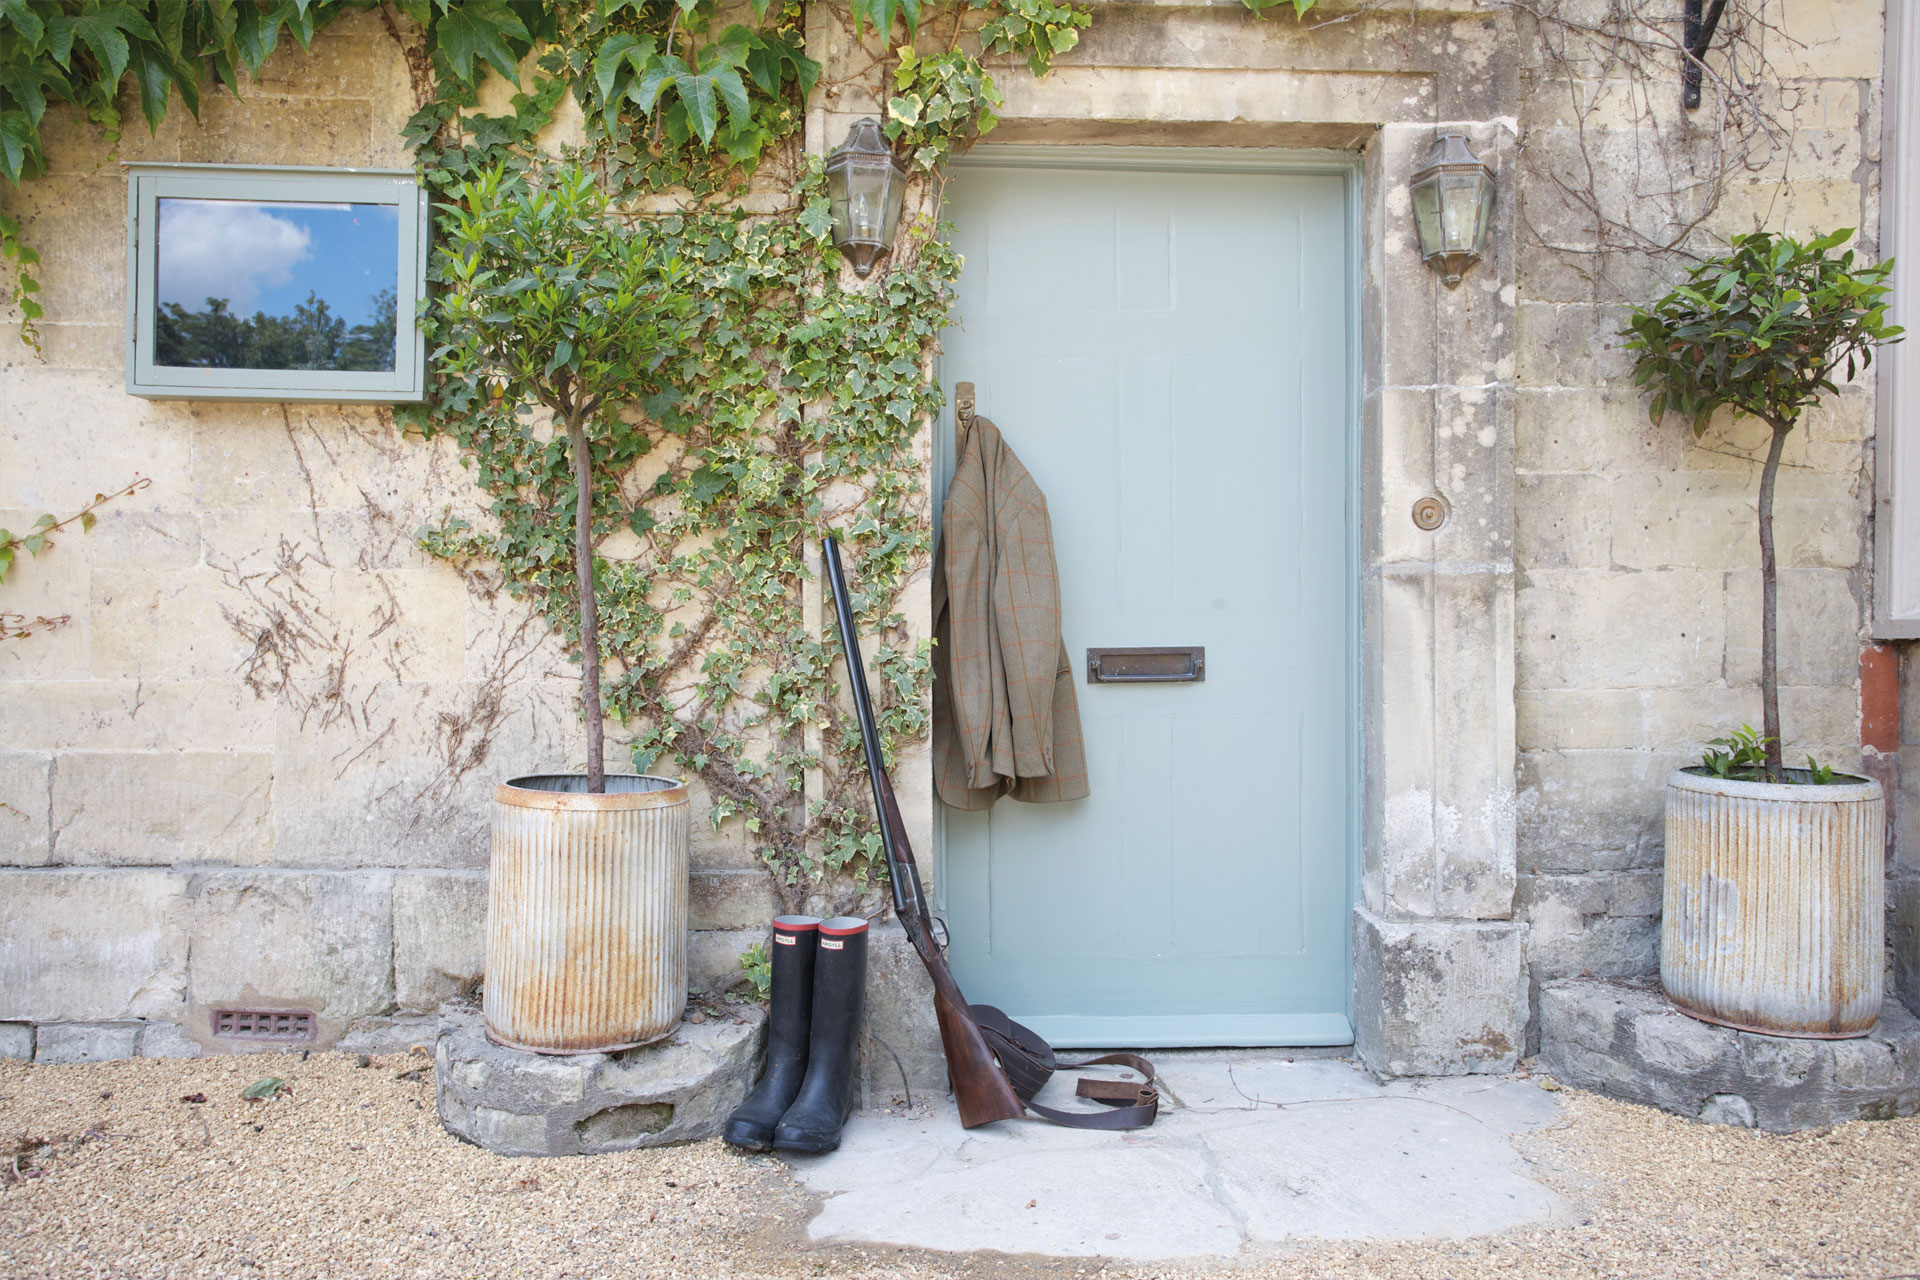 The front of the Beckford Arms - a pair of wellies and a jacket sit in front of a door